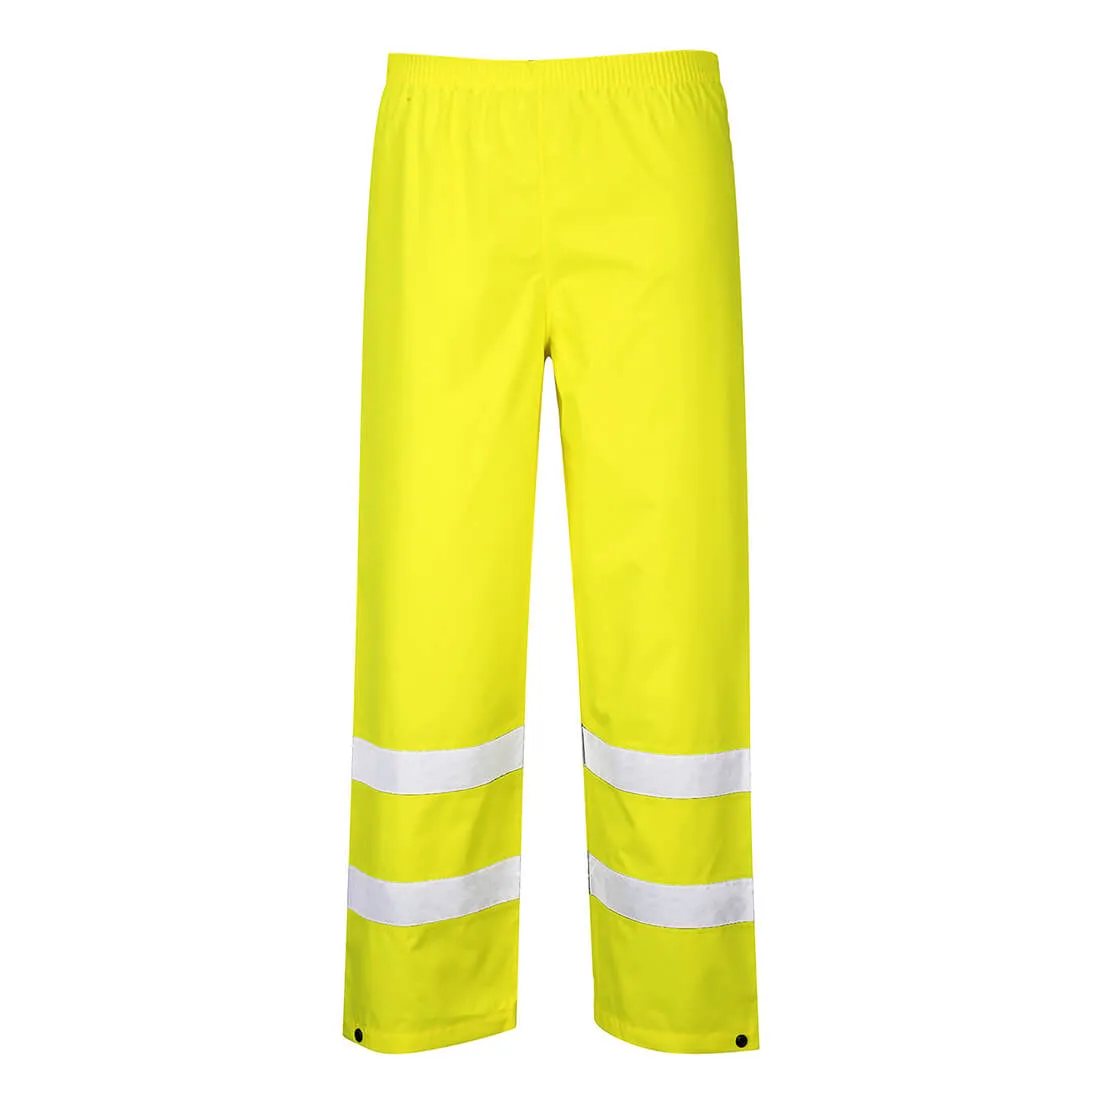 Oxford Weave 300D Class 1 Hi Vis Trousers - Yellow, Small, 32"